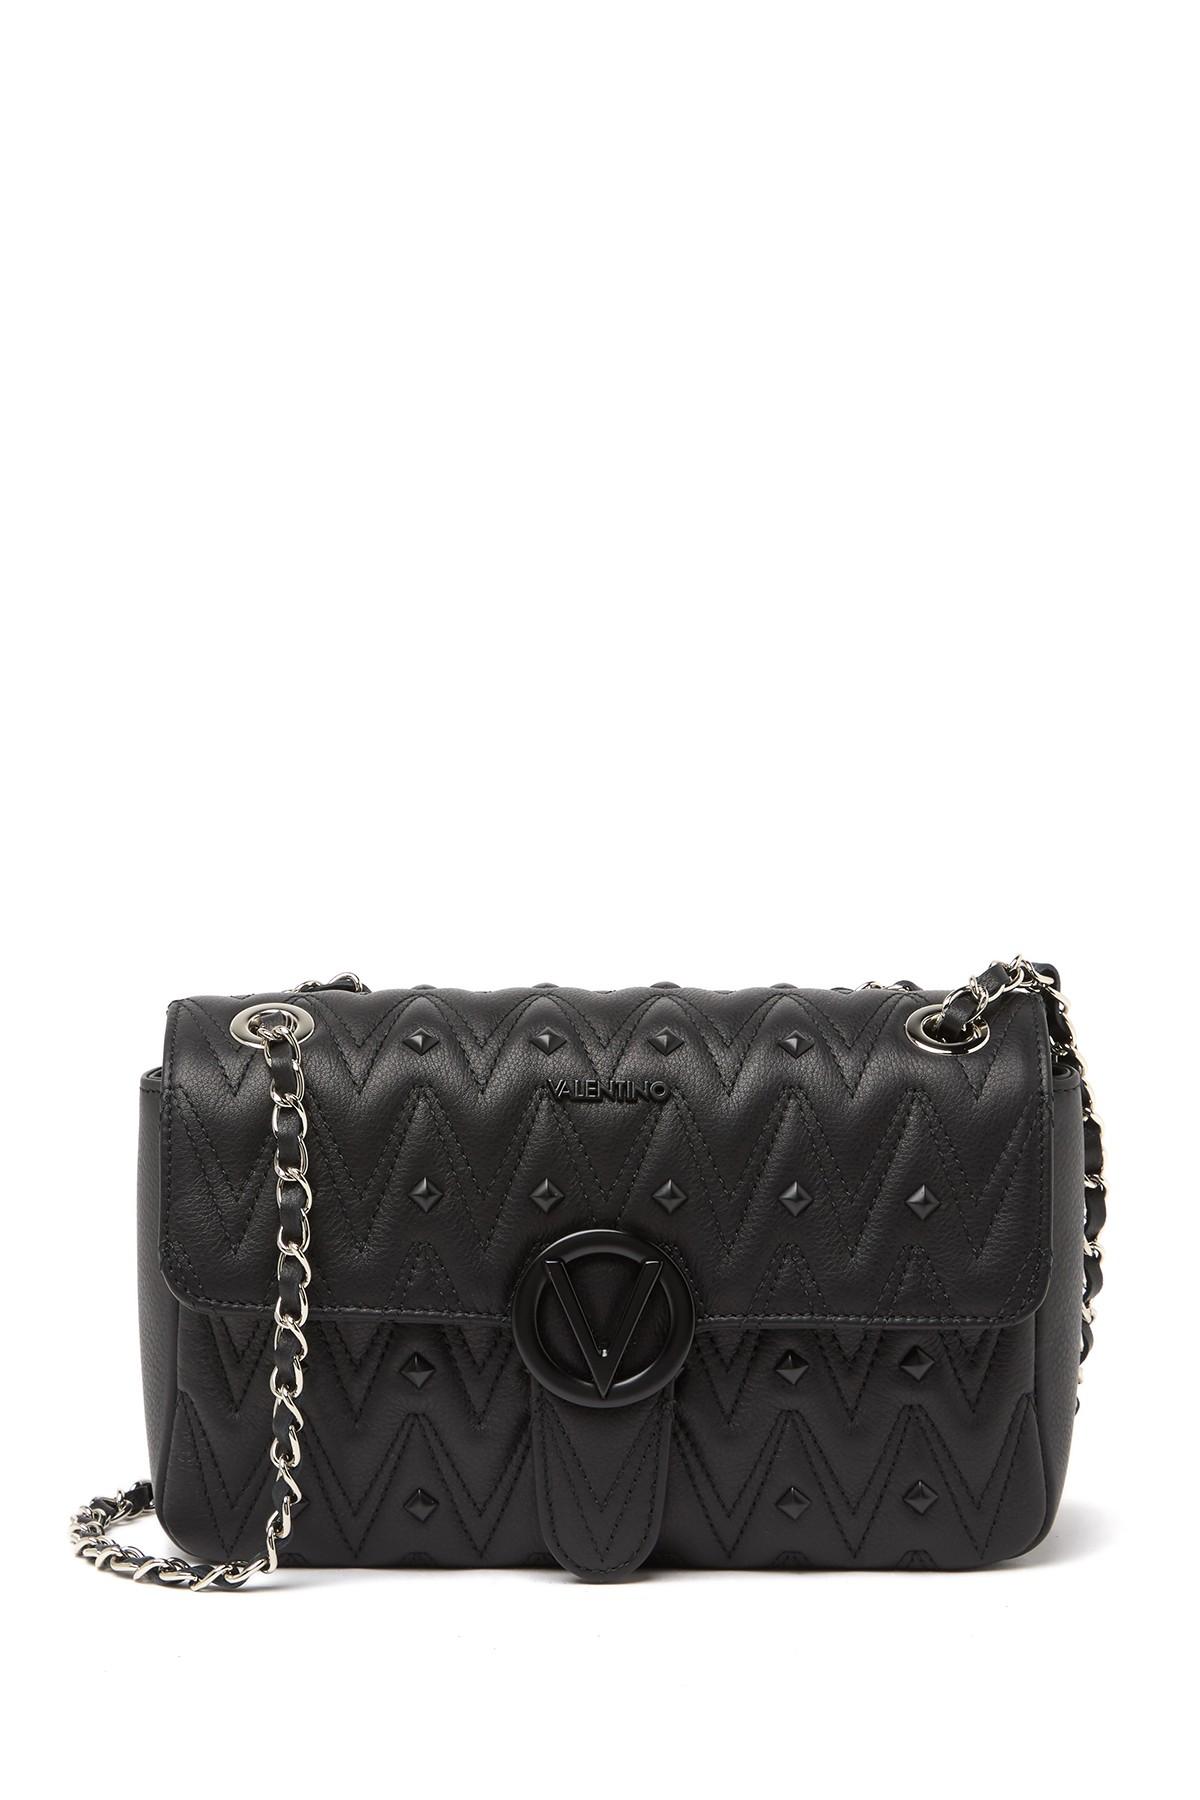 Valentino By Mario Valentino Antoinette Quilted Leather Shoulder 